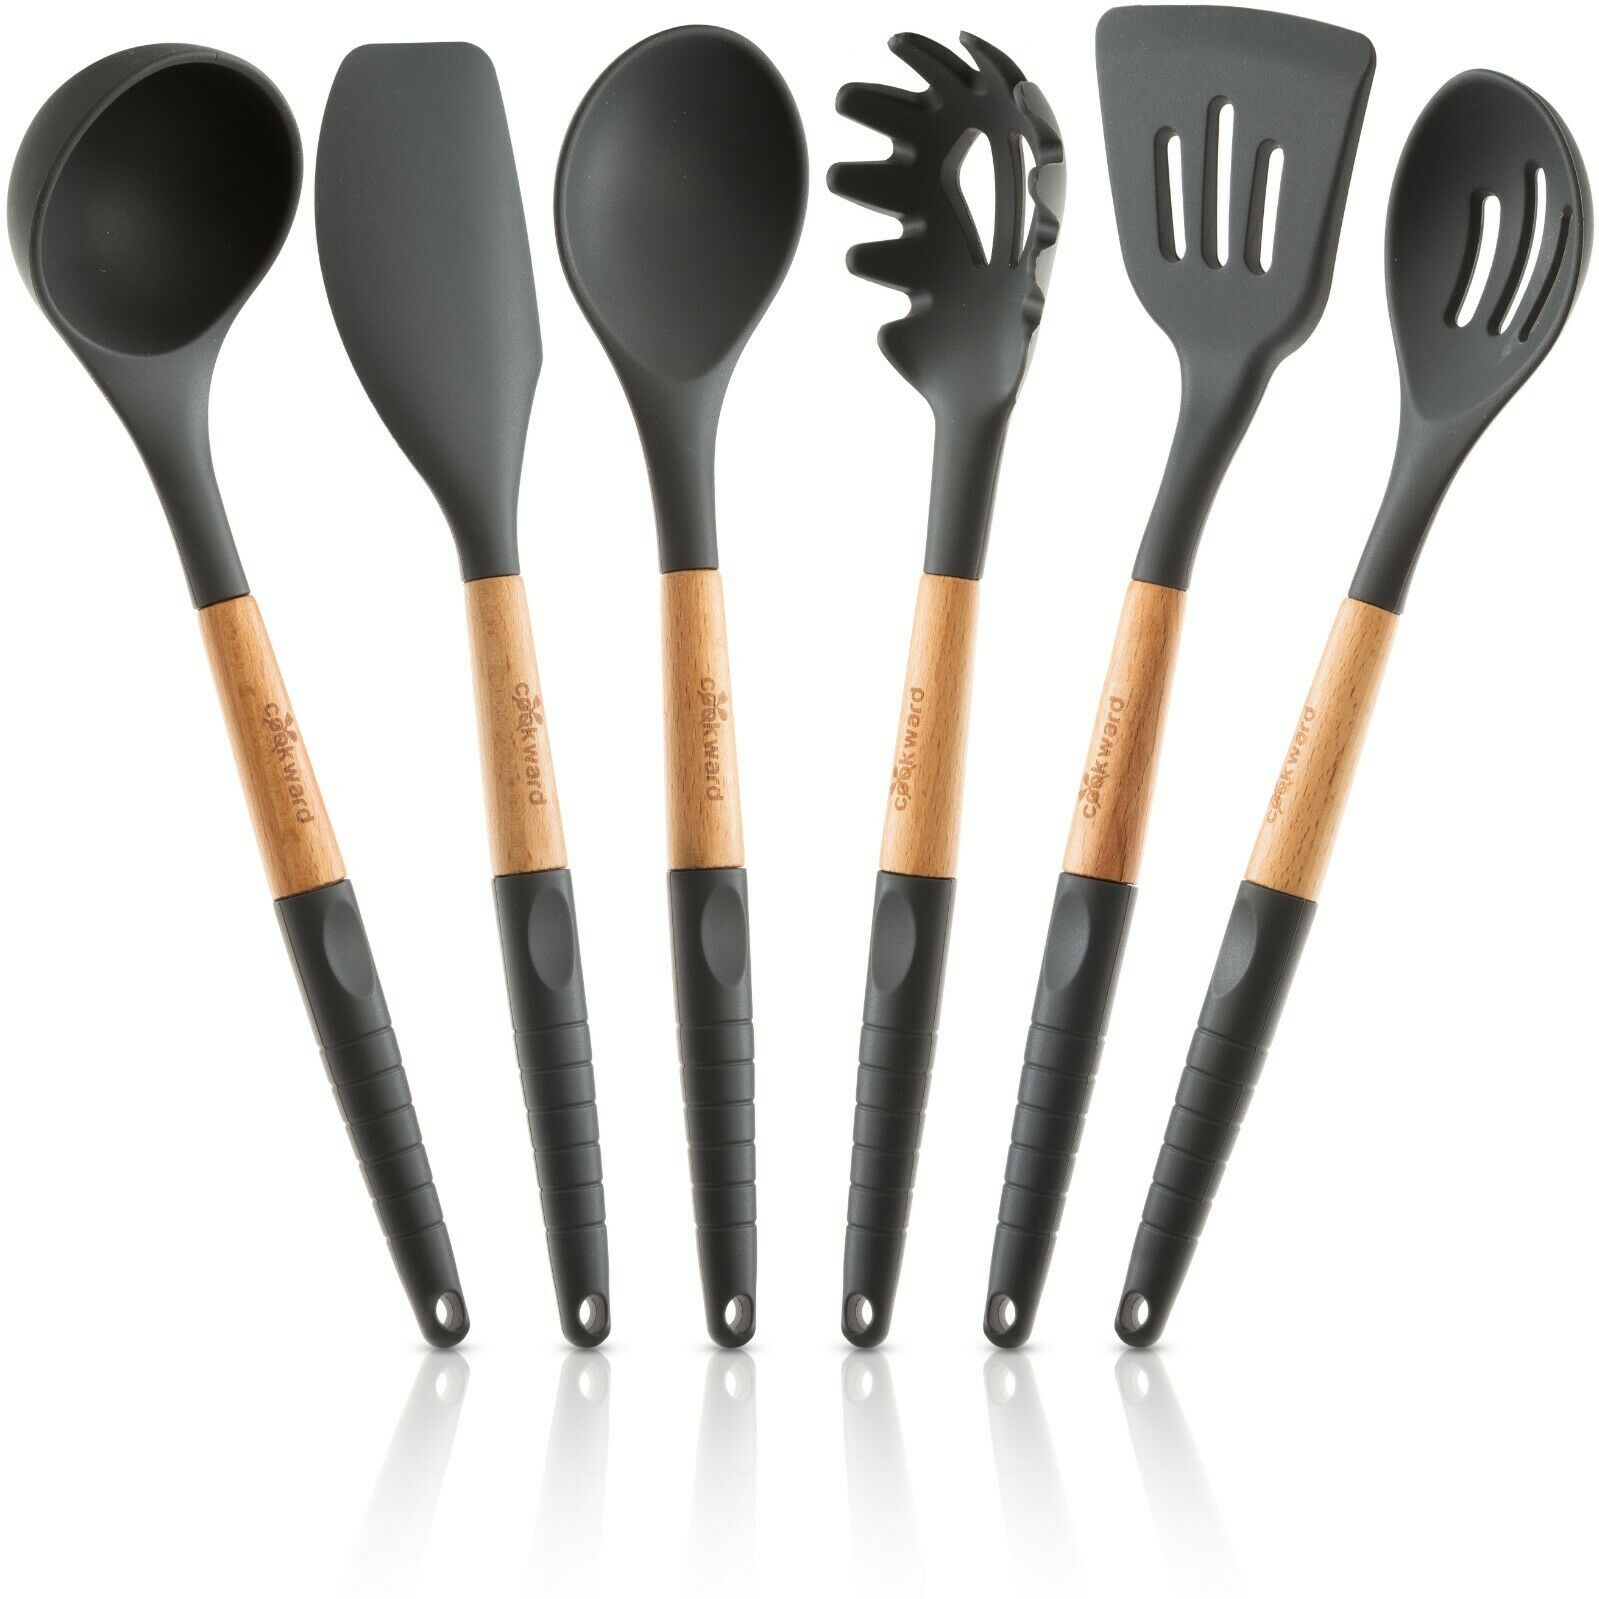 Silicone Kitchen Utensils Set (6 pcs): Natural Wood Cooking Tools, Non Scratch